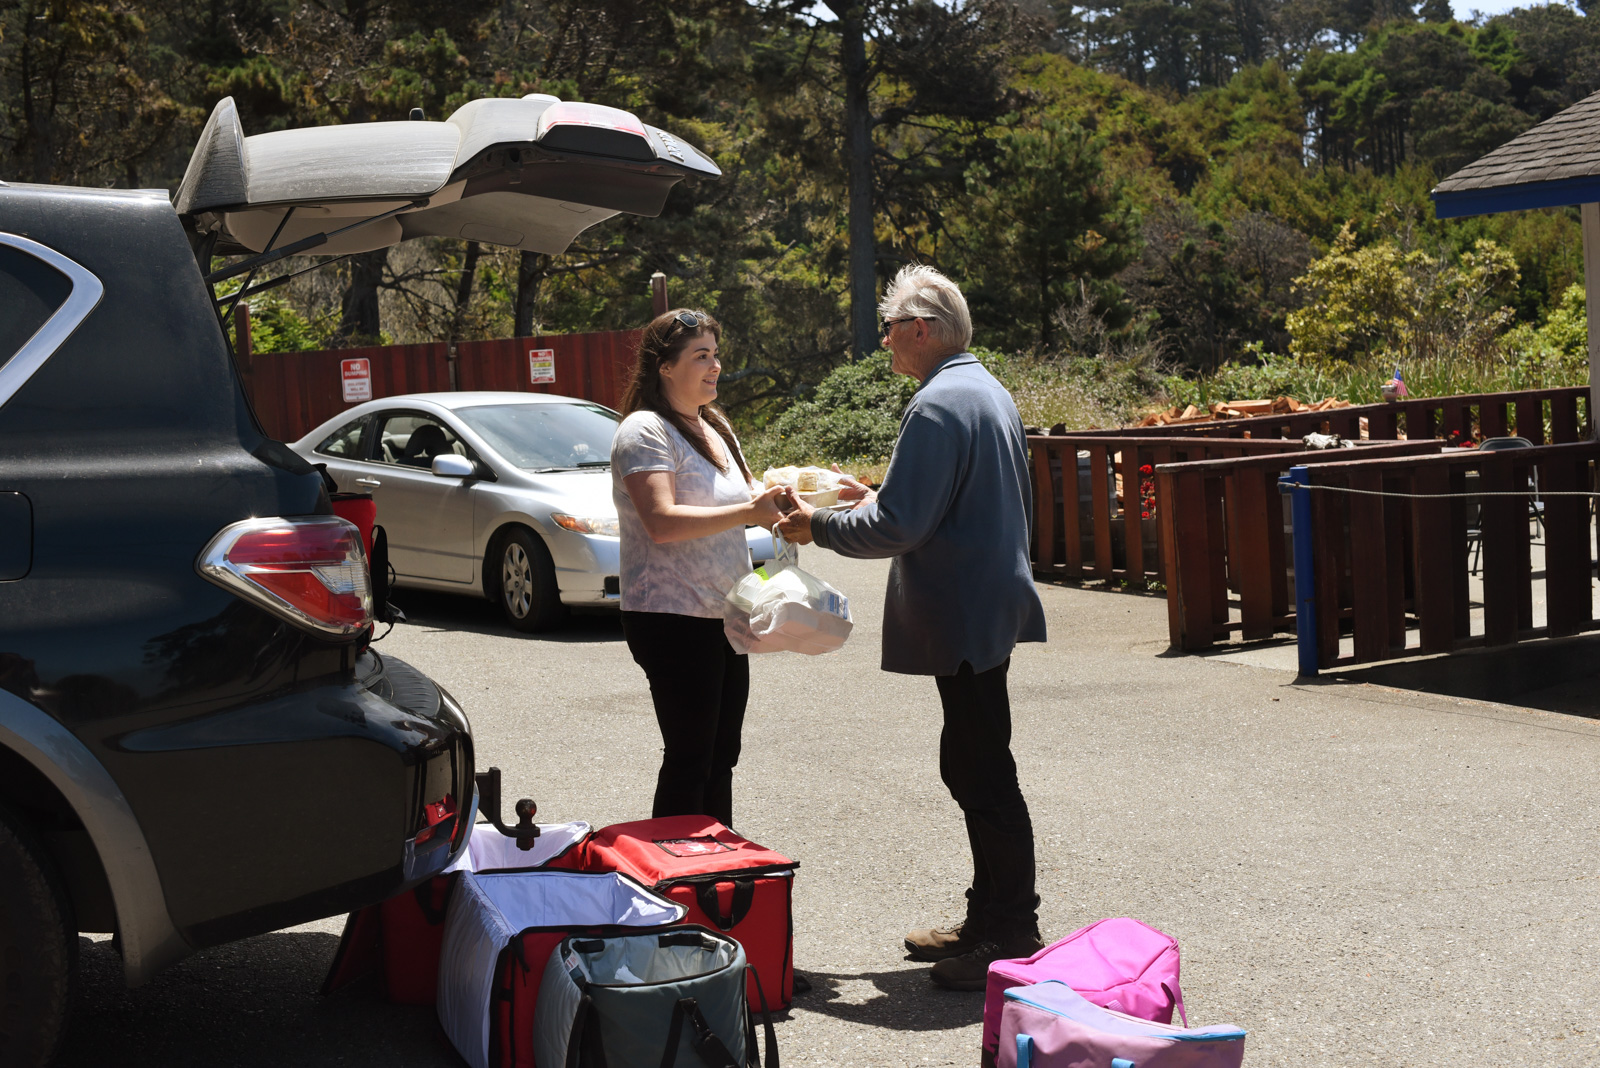 An elder community member picking up his food from a young lady holding trays and bags of food.